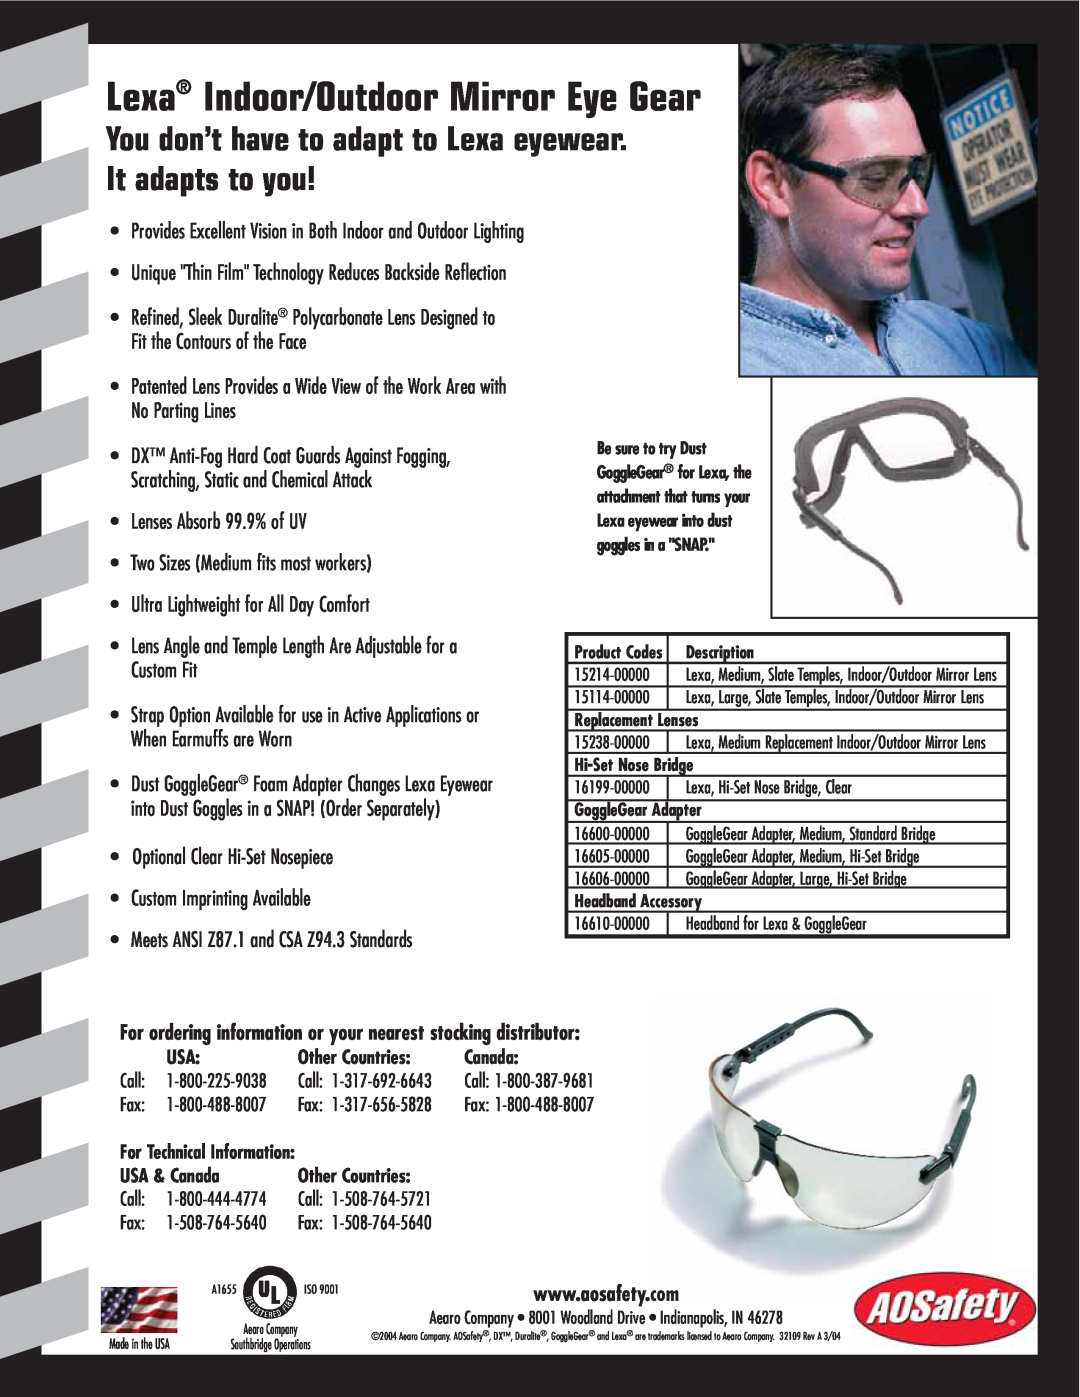 AOSafety Lexa Indoor/Outdoor Mirror Eye Gear, Lenses Absorb 99.9% of UV, Two Sizes Medium fits most workers, Canada 